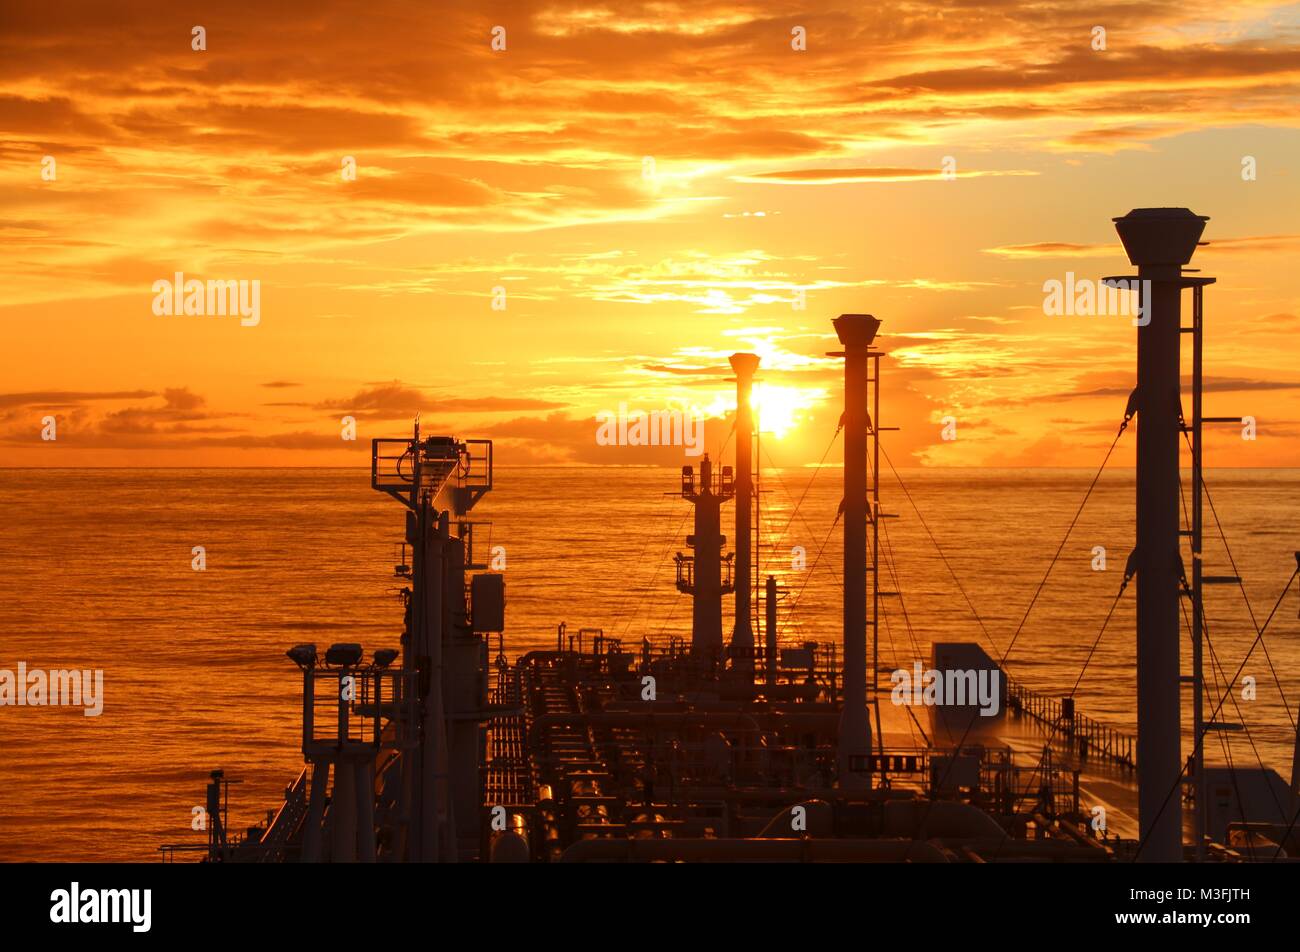 This photo was taken on board a liquefied natural gas carrier in the Atlantic. Stock Photo